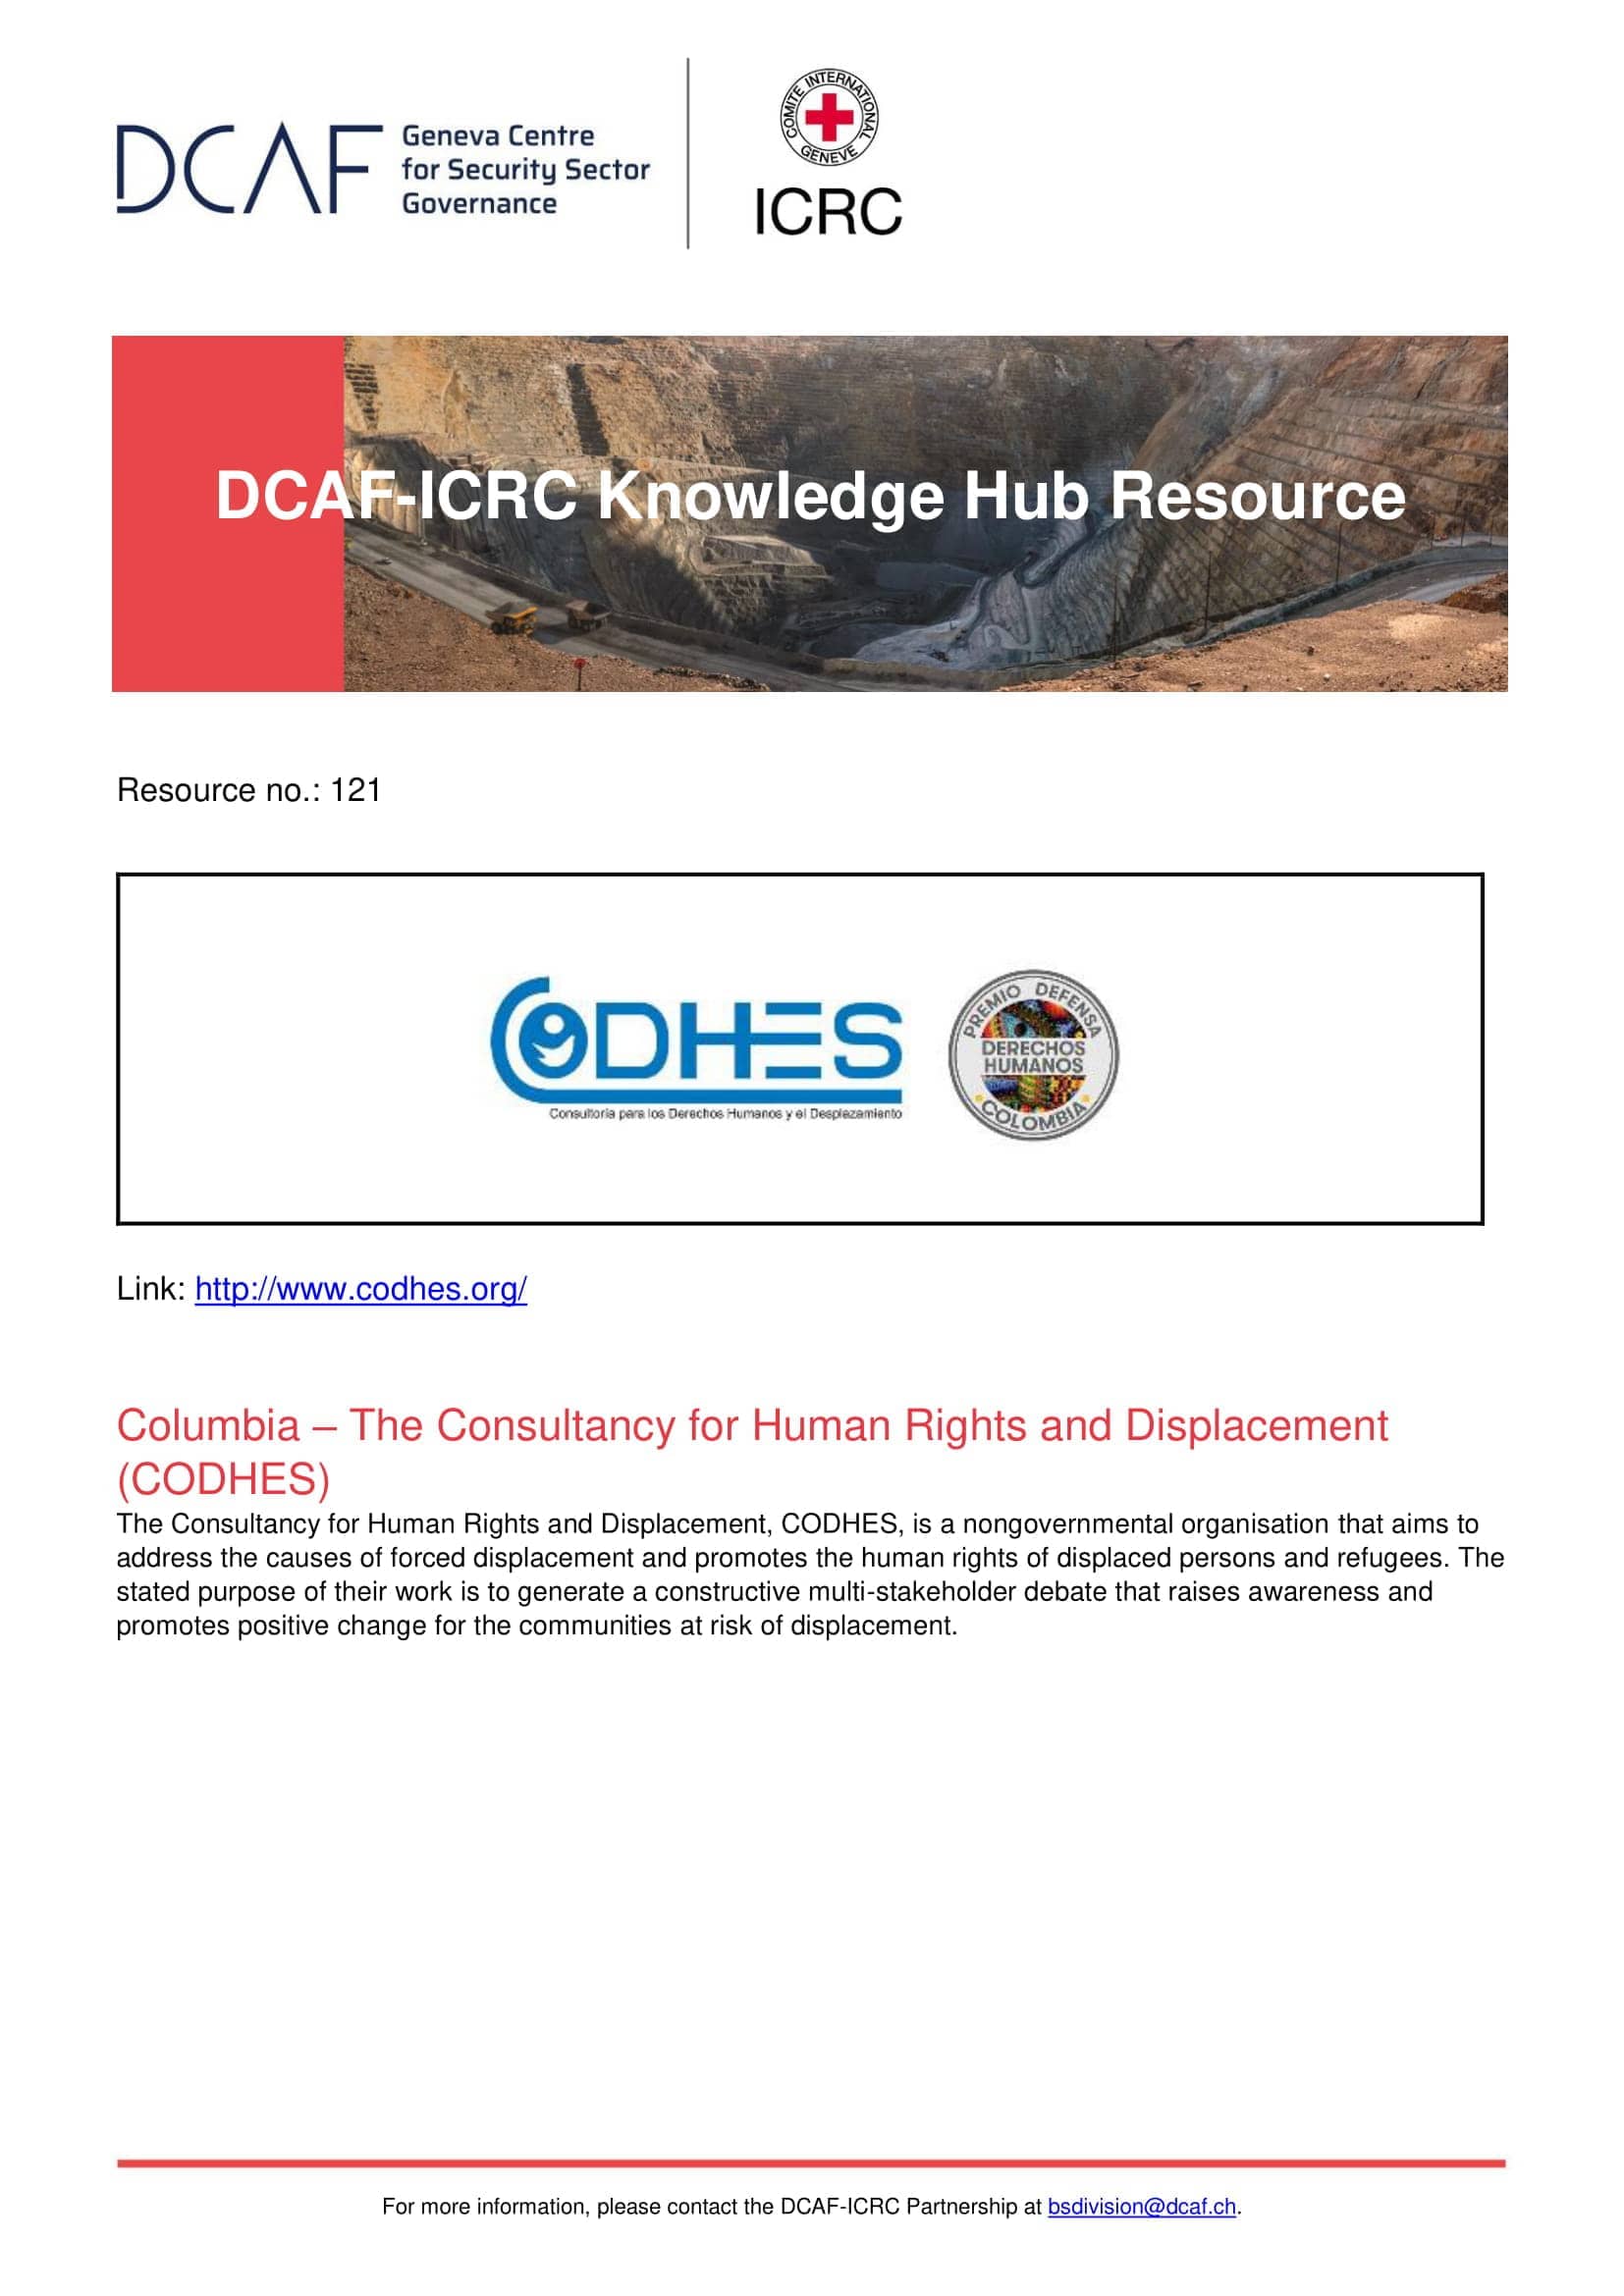 Columbia – The Consultancy for Human Rights and Displacement (CODHES)